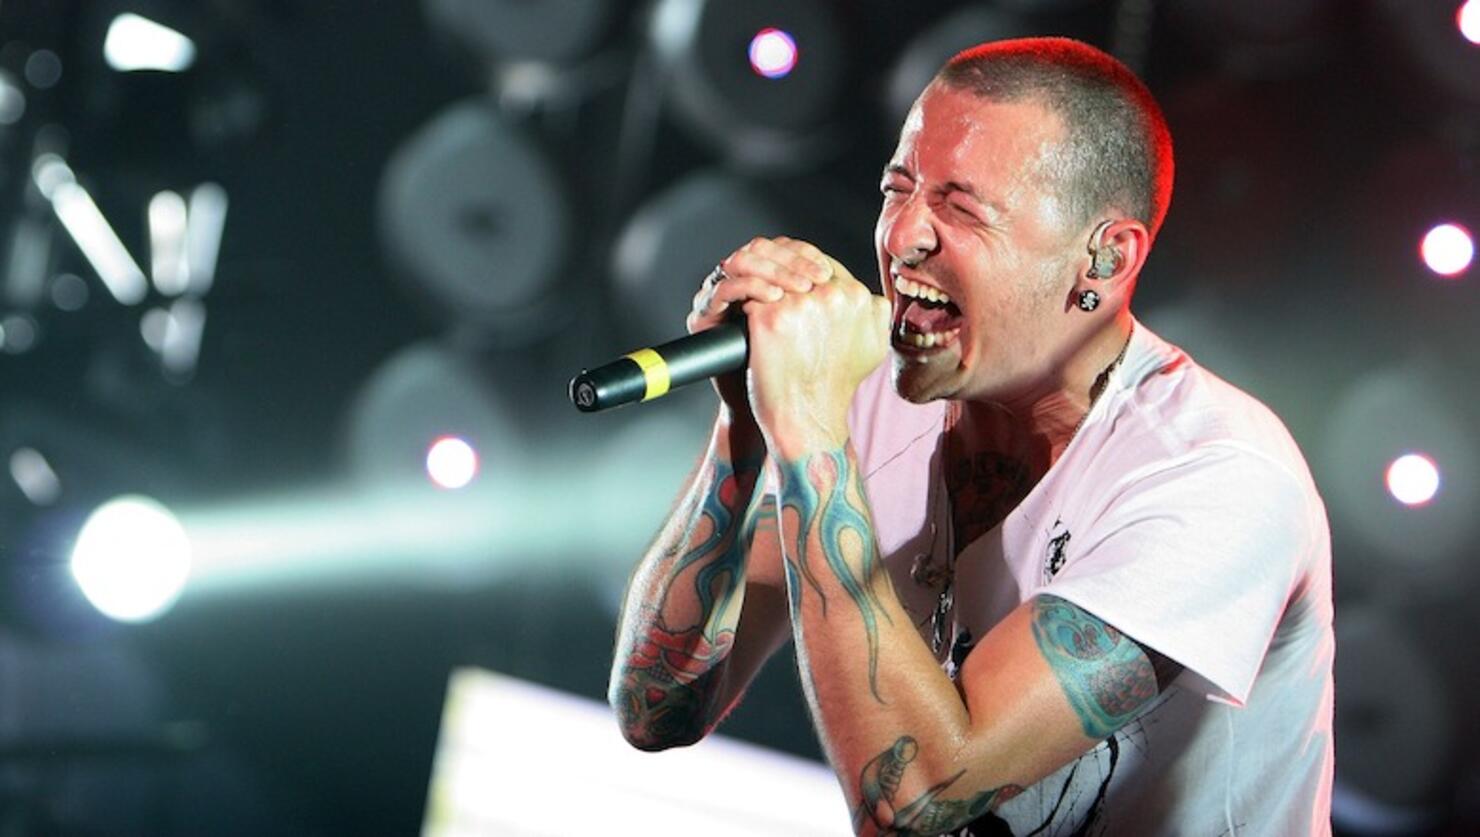 A Version Of Linkin Park's 'One More Light' Surfaced